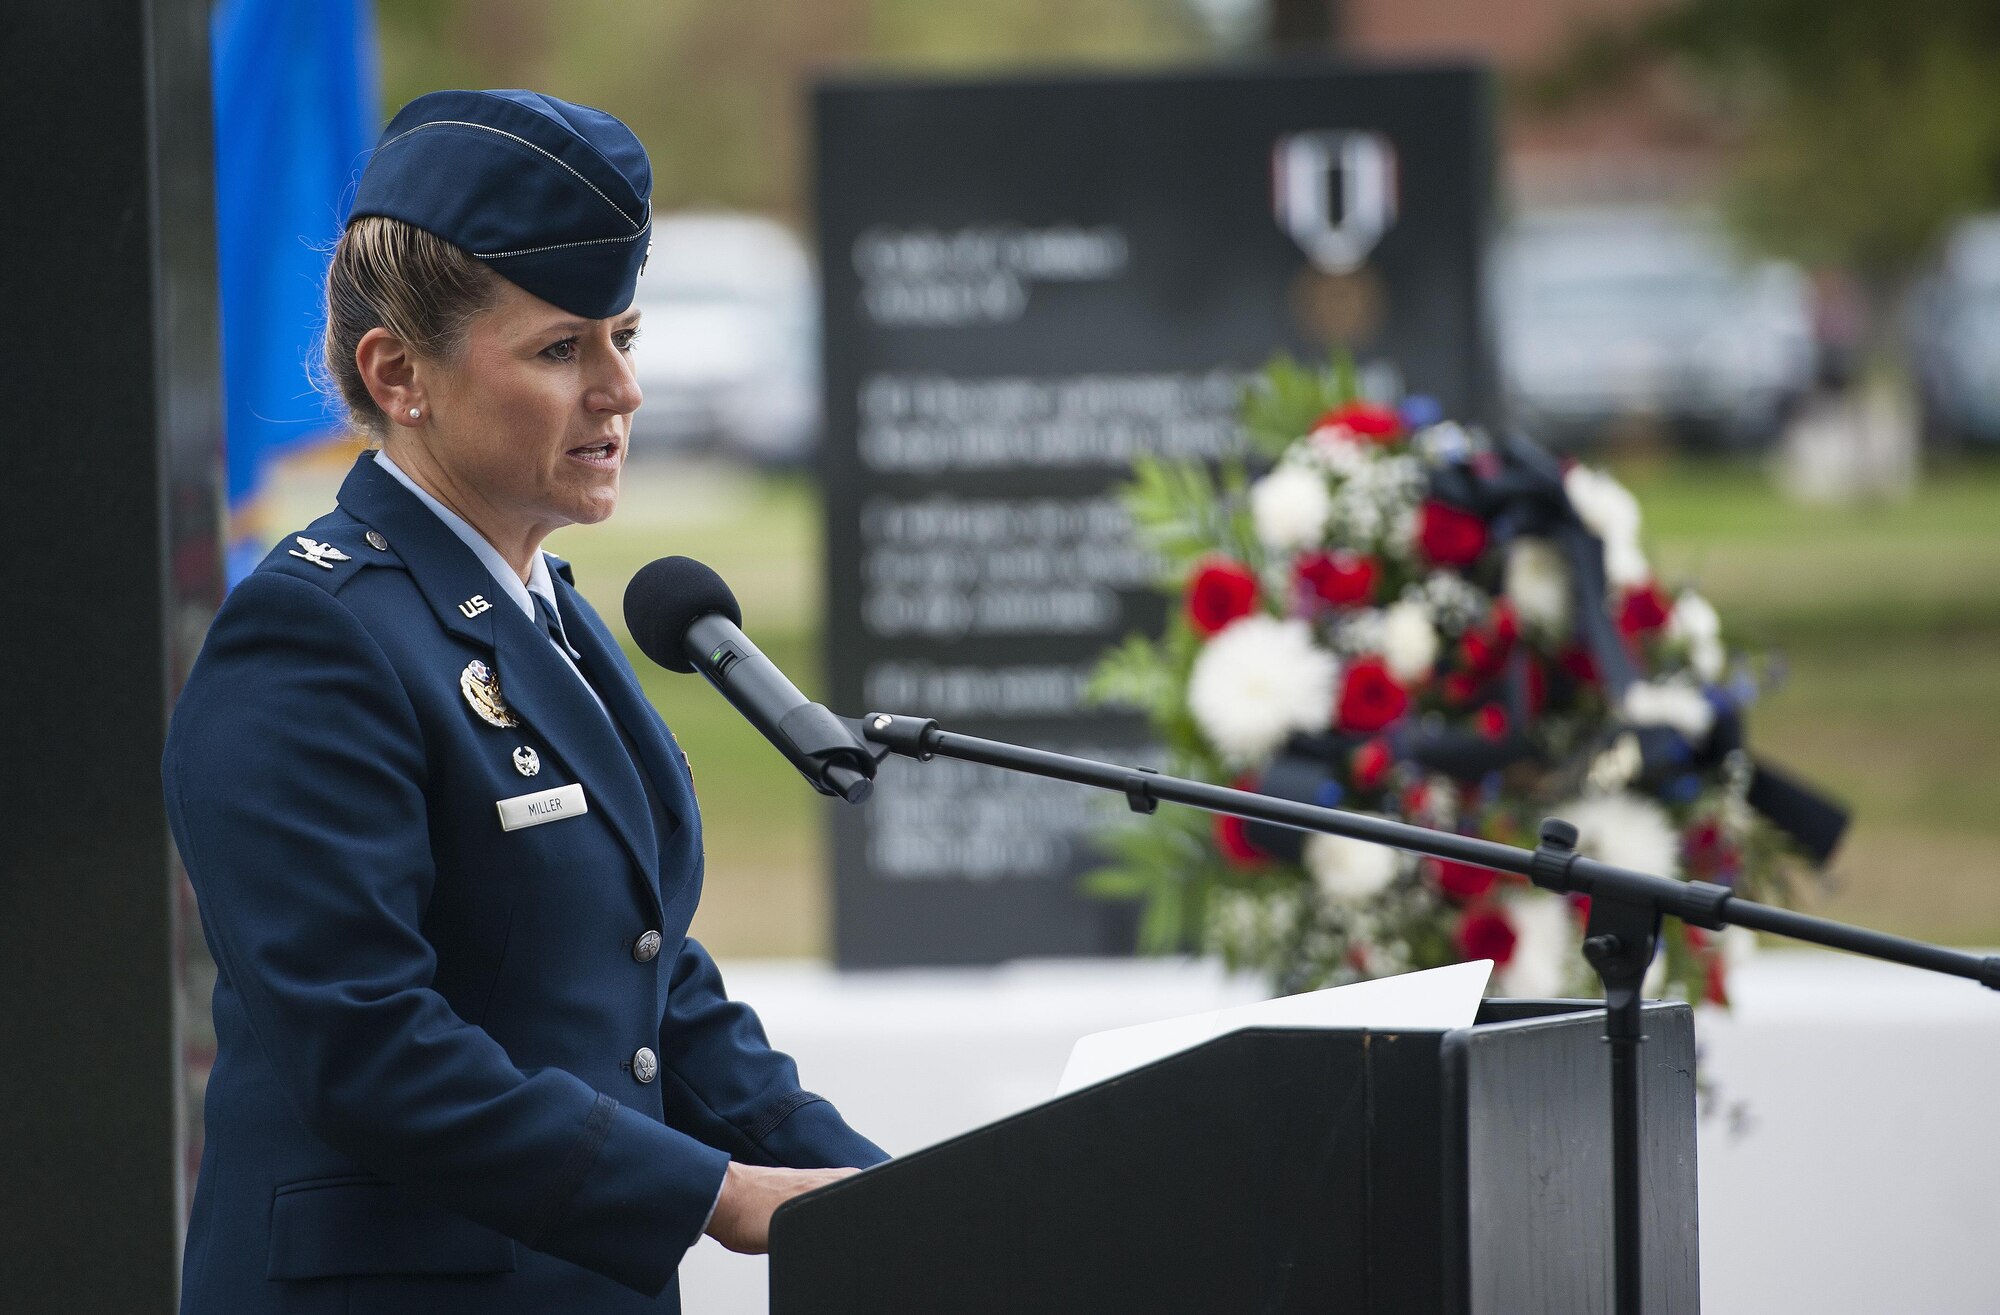 Col. Caroline M. Miller, 633rd Air Base Wing commander, during a Prisoner of War/Missing in Action closing ceremony at Joint Base Langley-Eustis, Va., Sept. 16, 2016. Since World War I, more than 150,000 Americans have been held as prisoners of war and more than 83,400 service members are still unaccounted for. (U.S. Air Force photo by Staff Sgt. Nick Wilson)